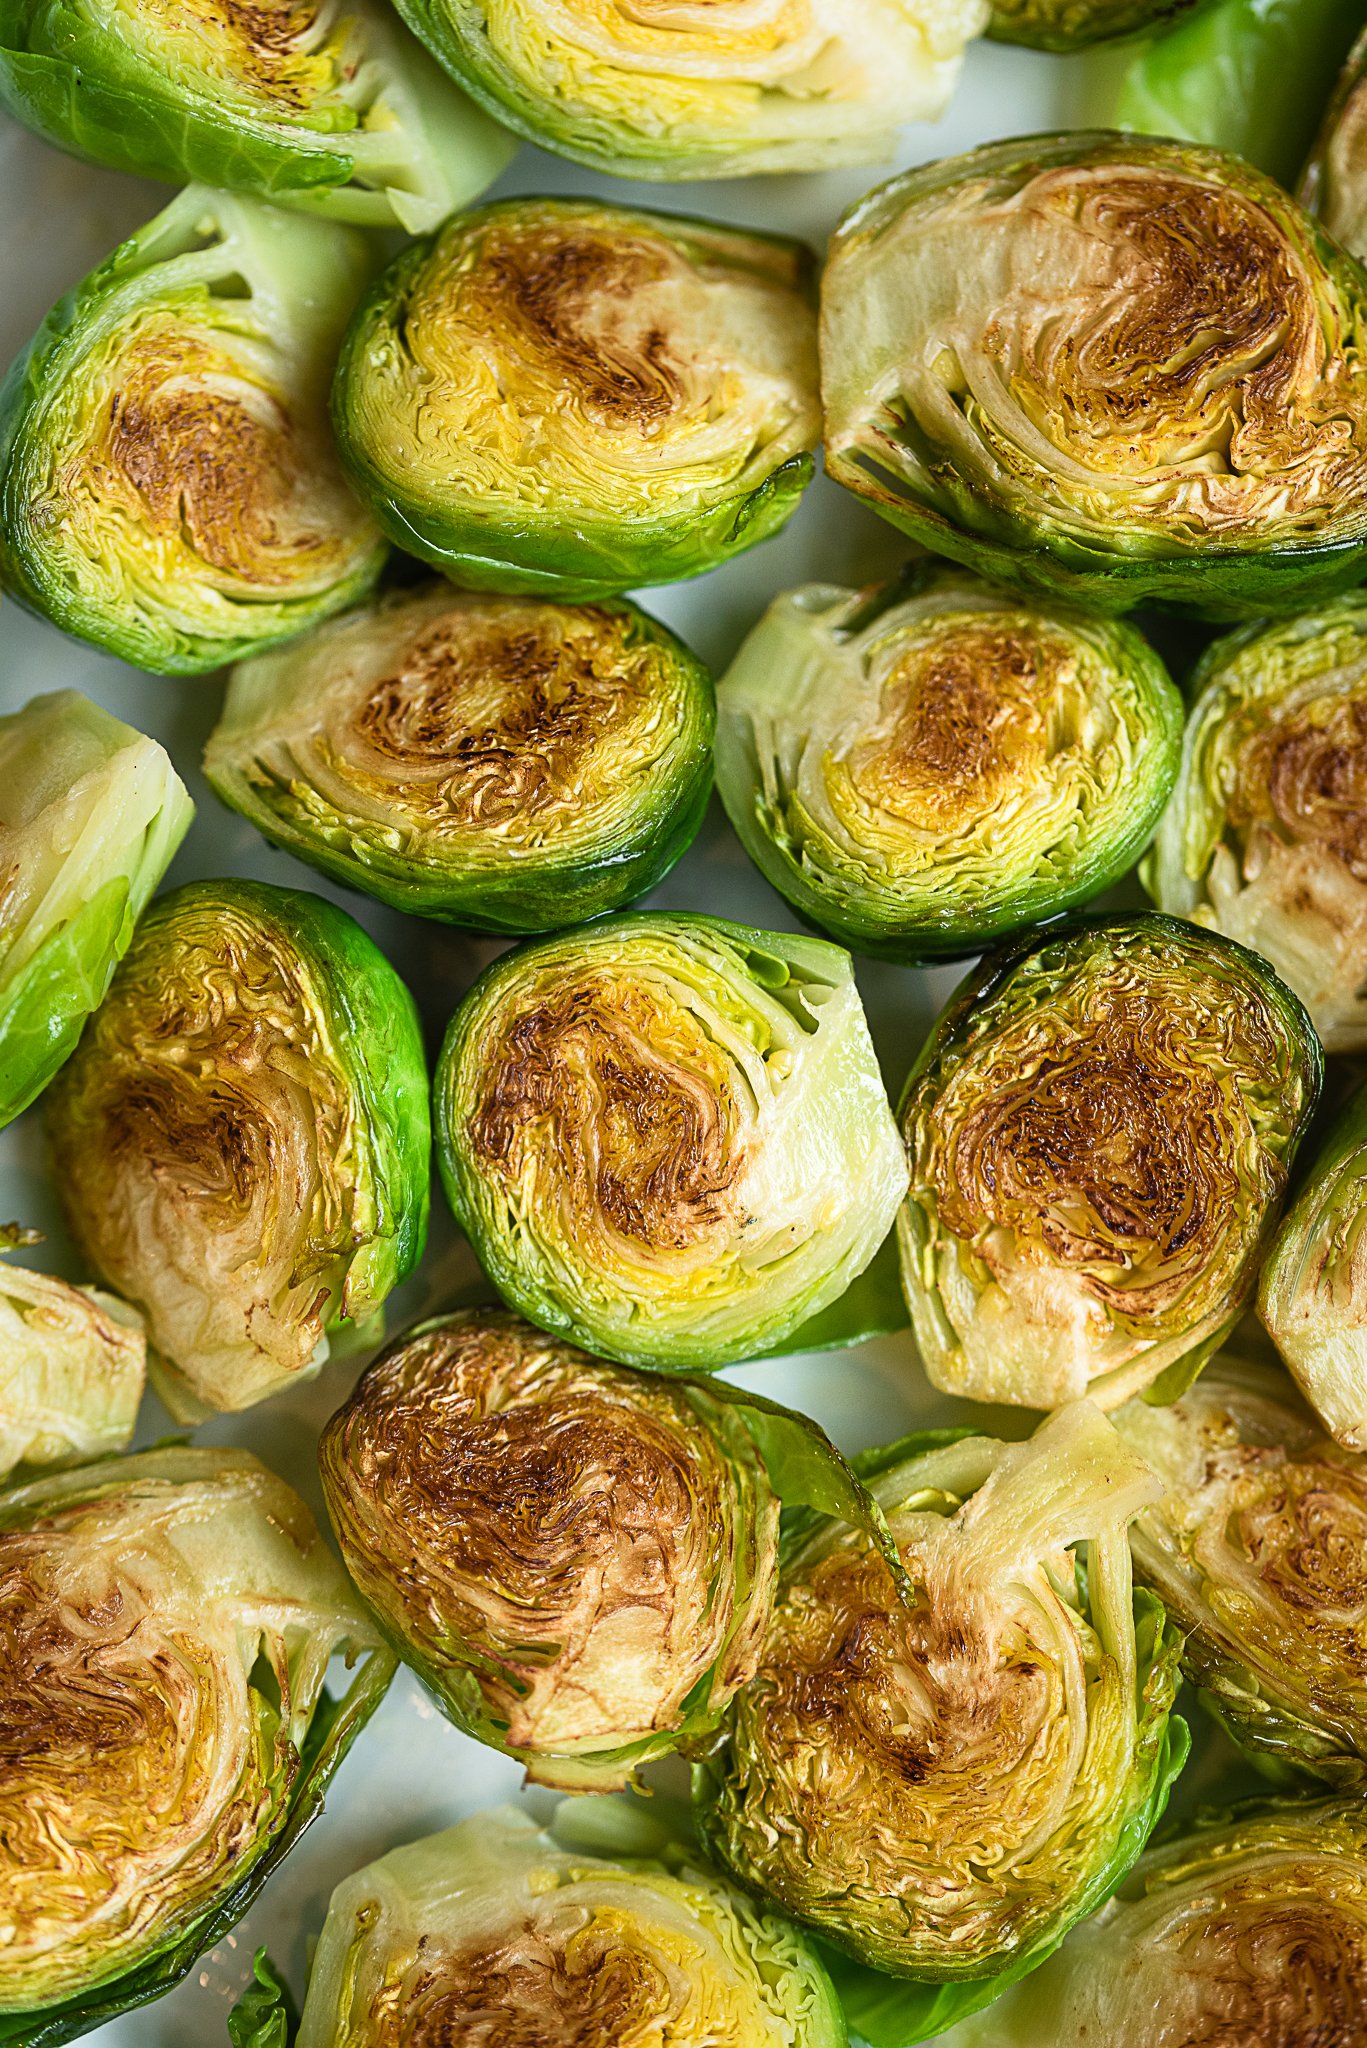 Brussel sprouts stages.jpg